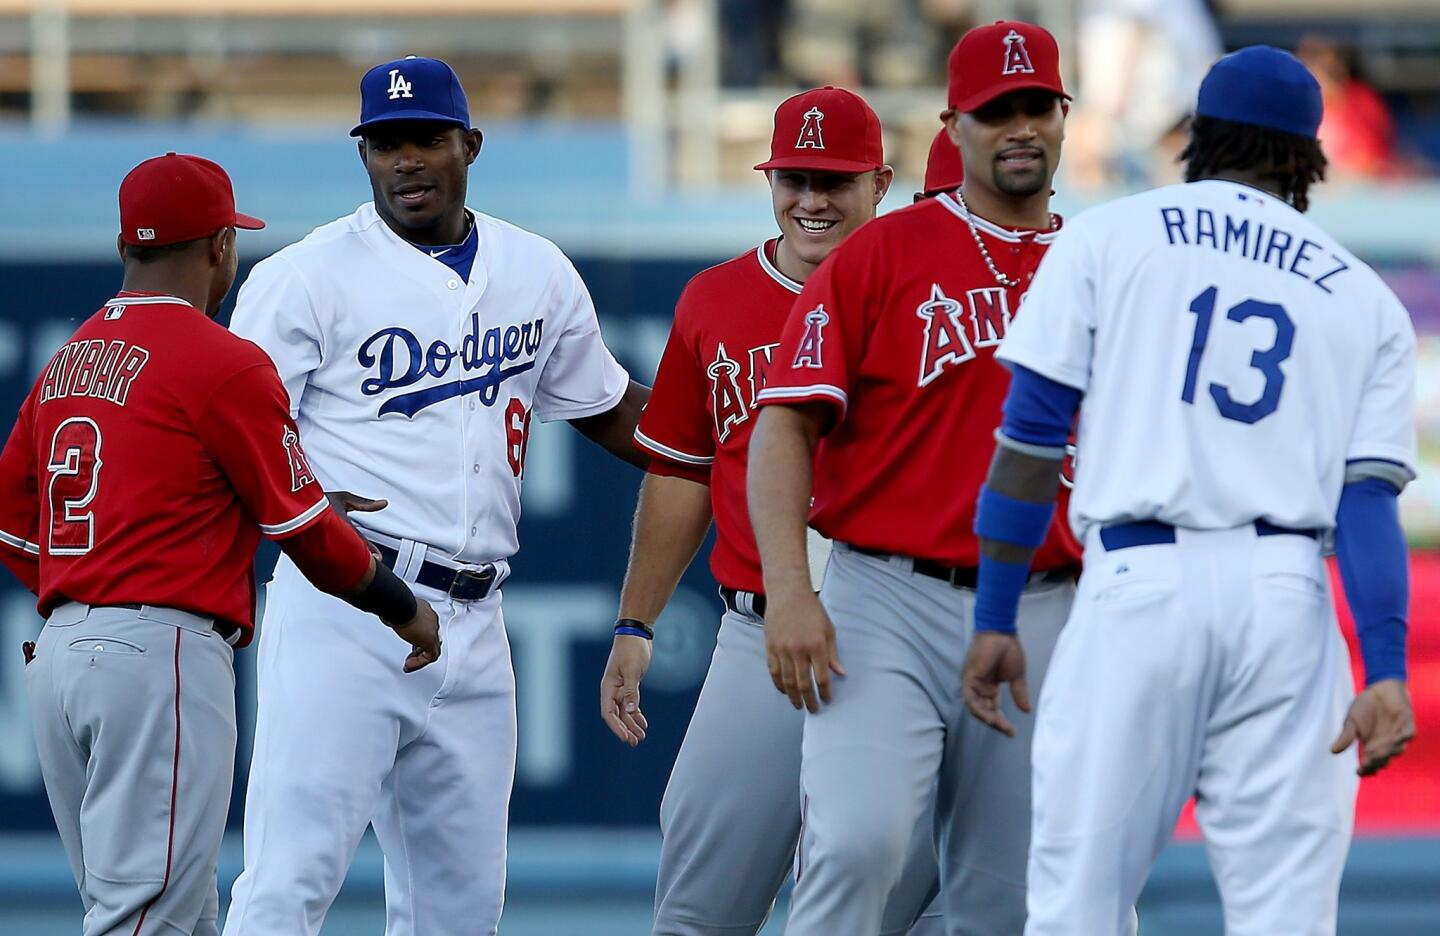 Dodgers, Angels players